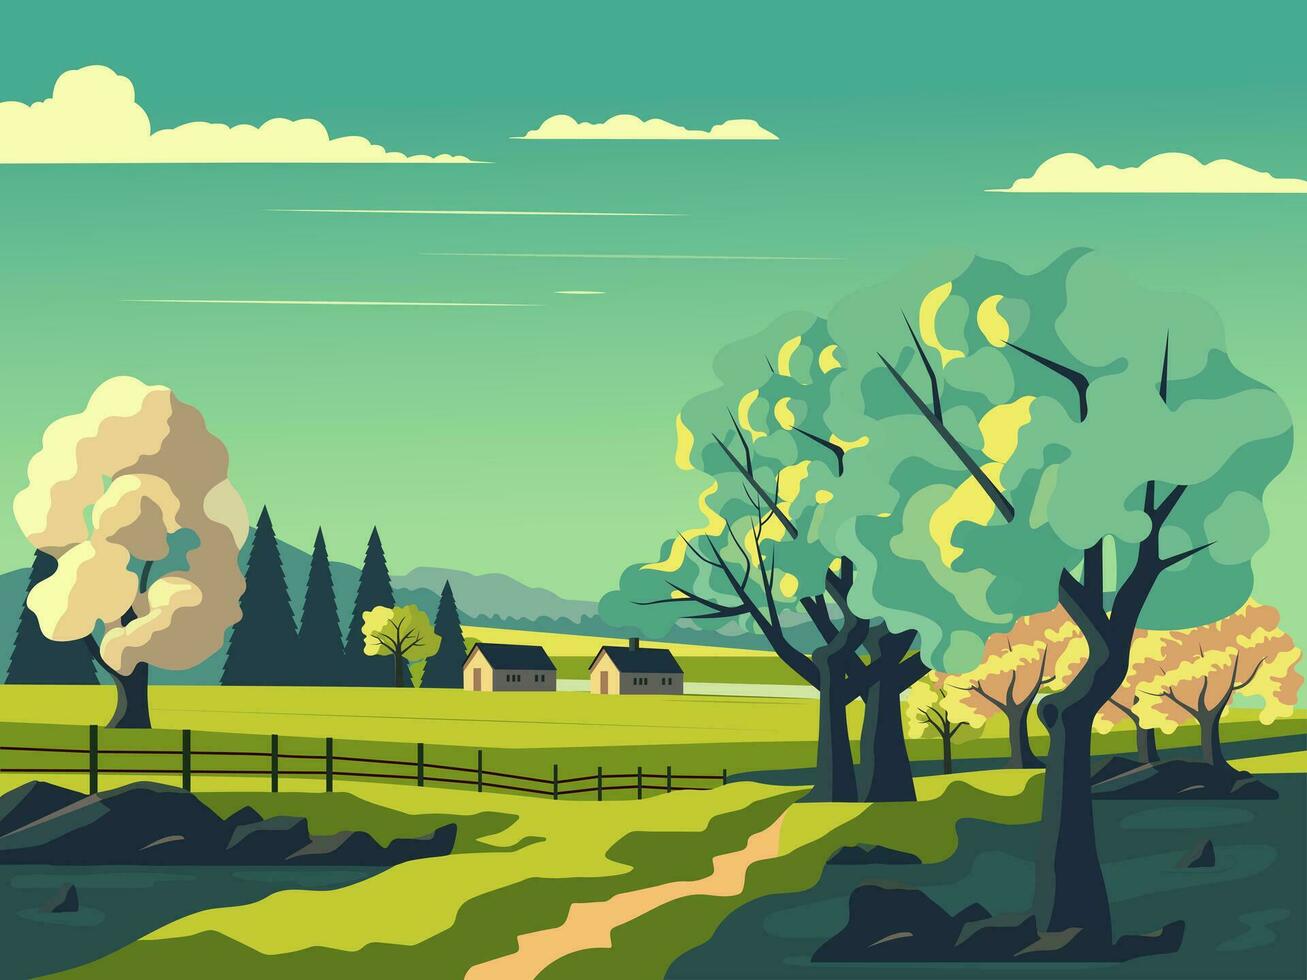 Nature Landscape Background With Trees, Pathway And Cottage Illustration. Vector. vector